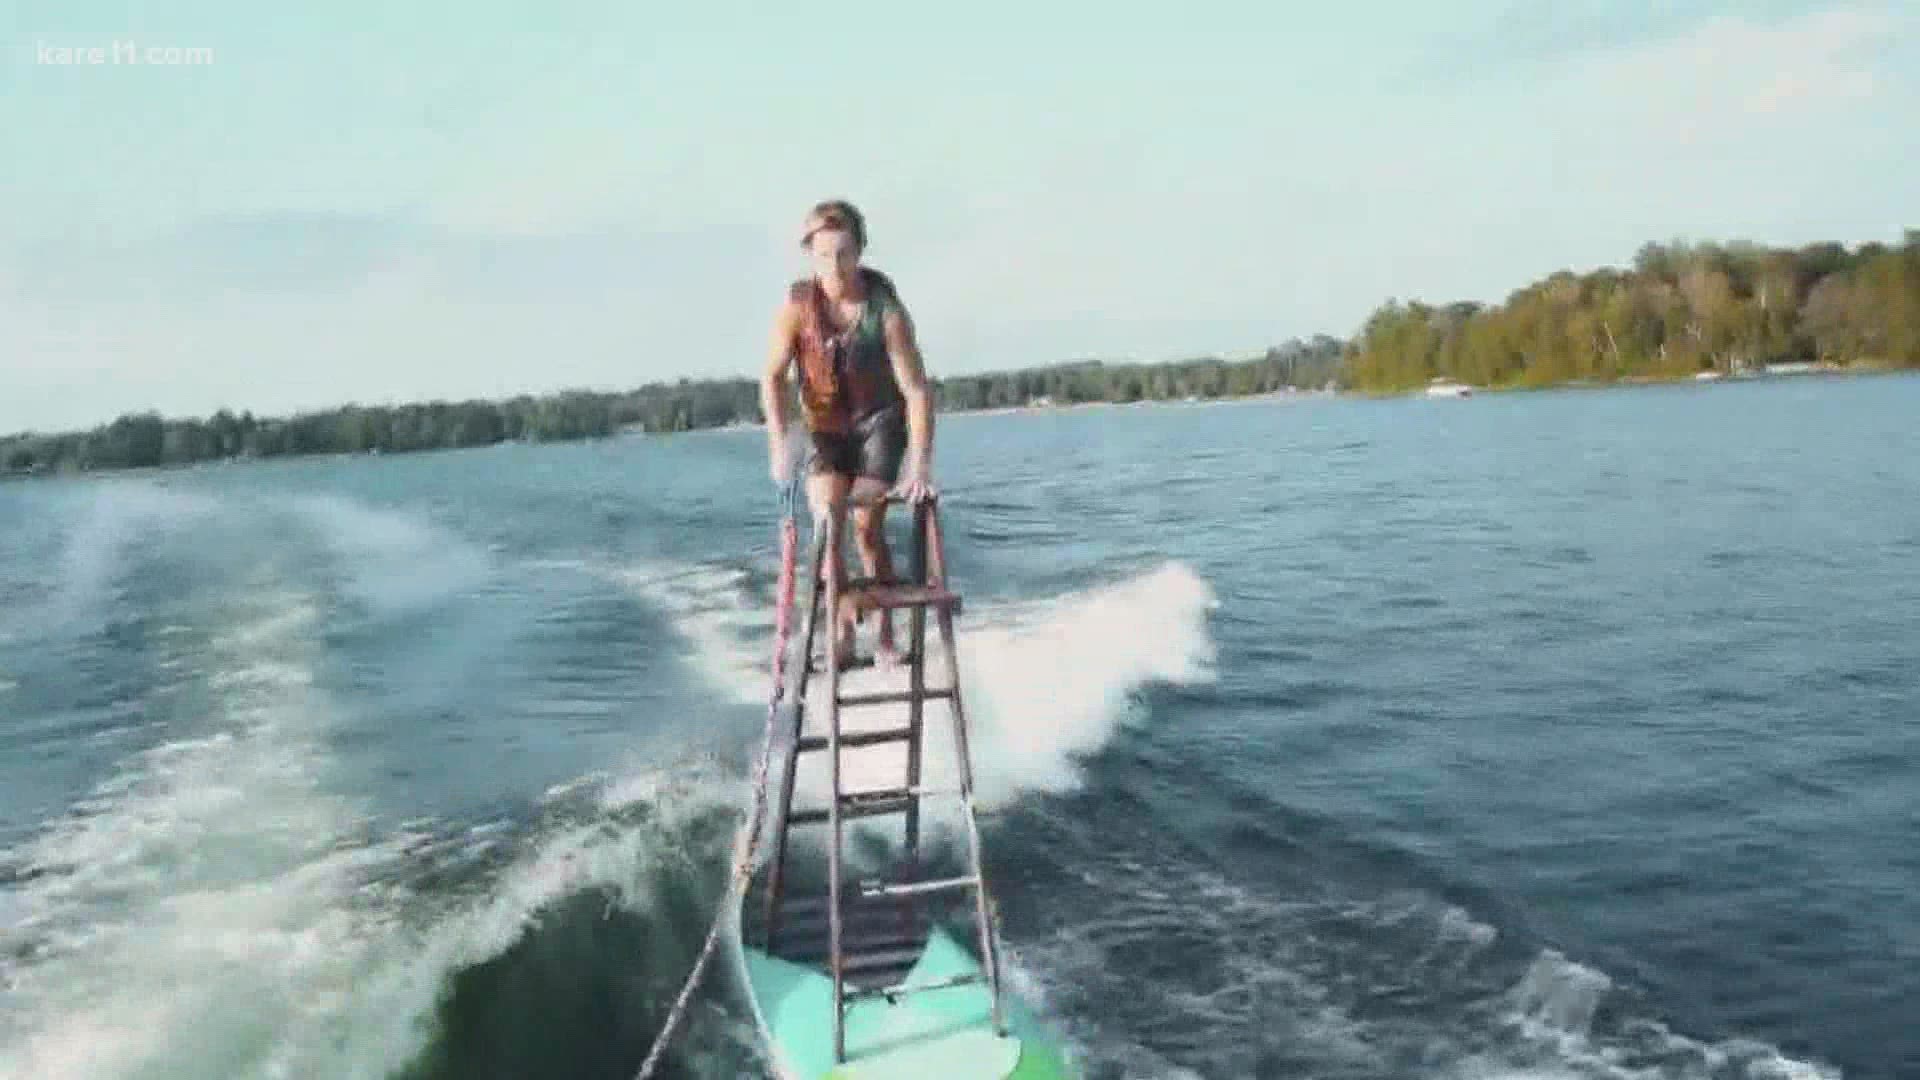 18-year-old Tucker Jobe says he can wakeboard on just about anything.